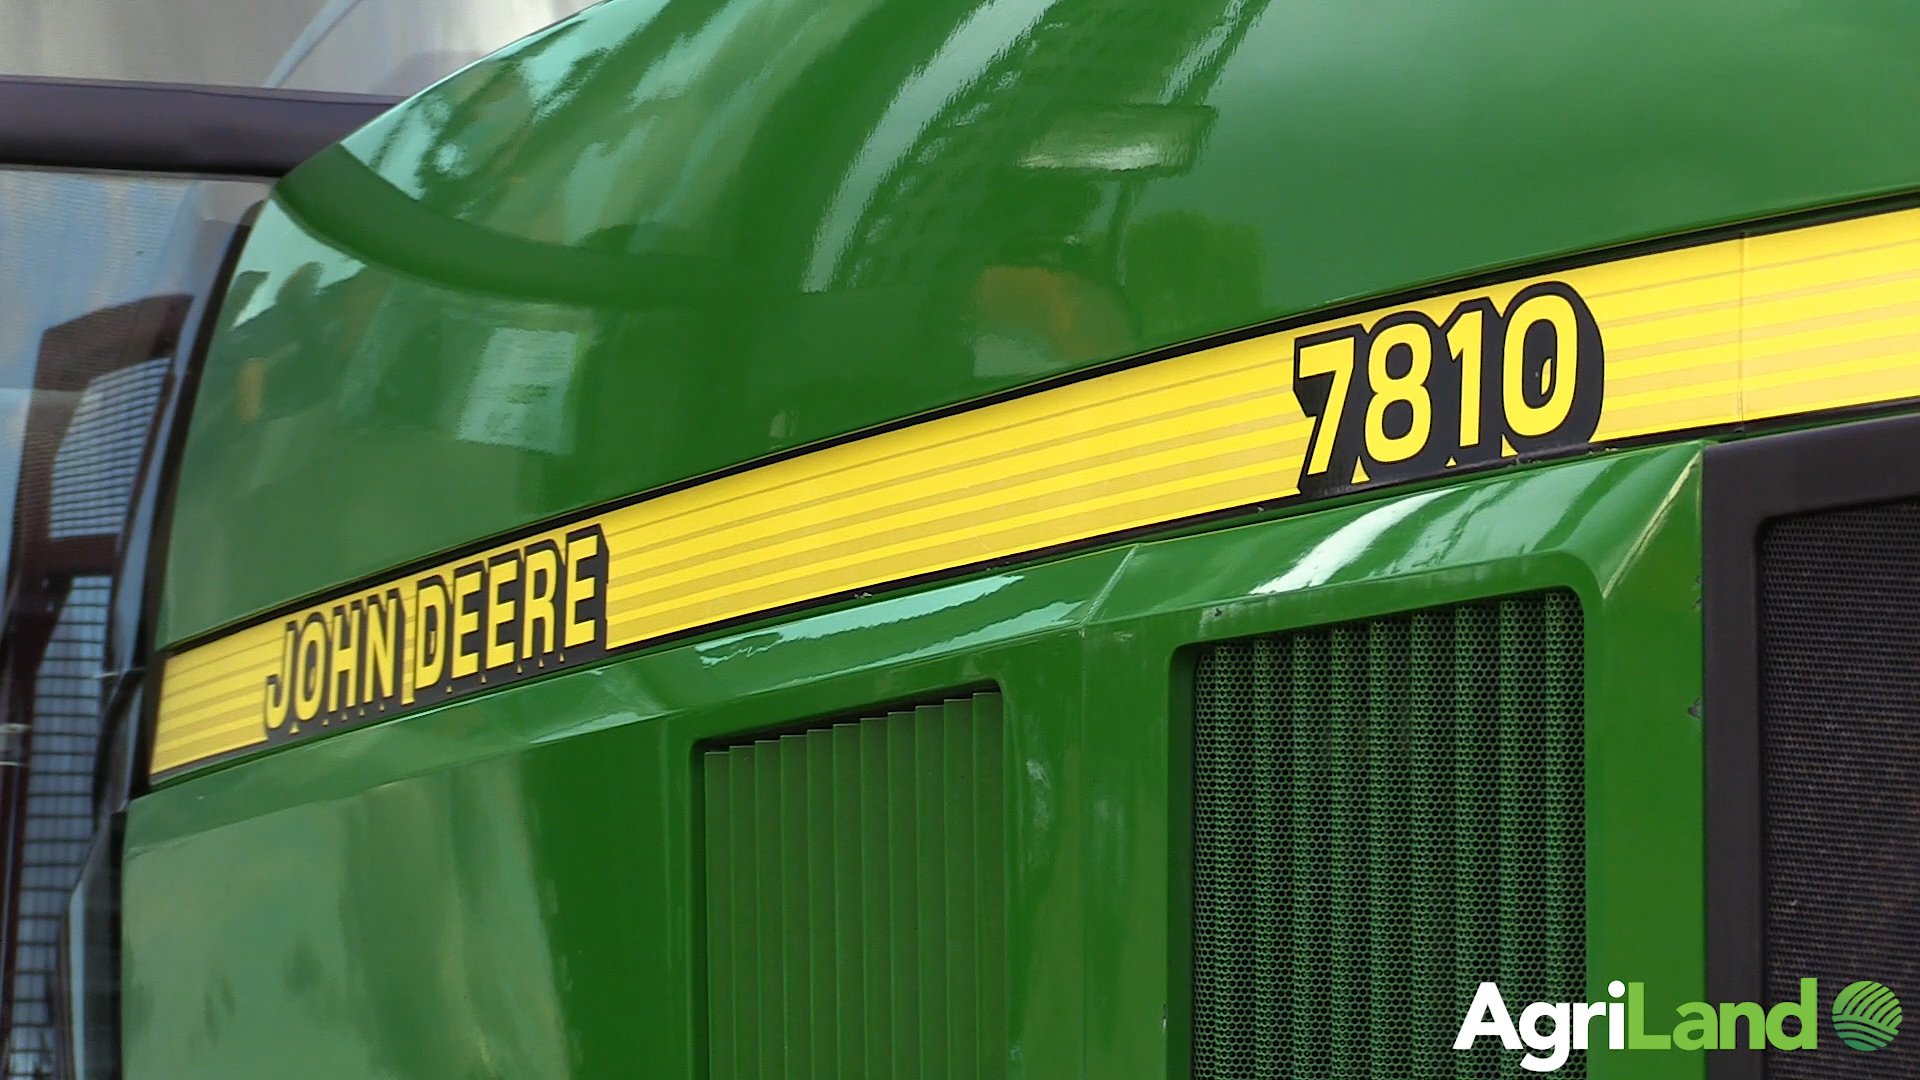 Video: 'It's one of the best tractors John Deere ever made'